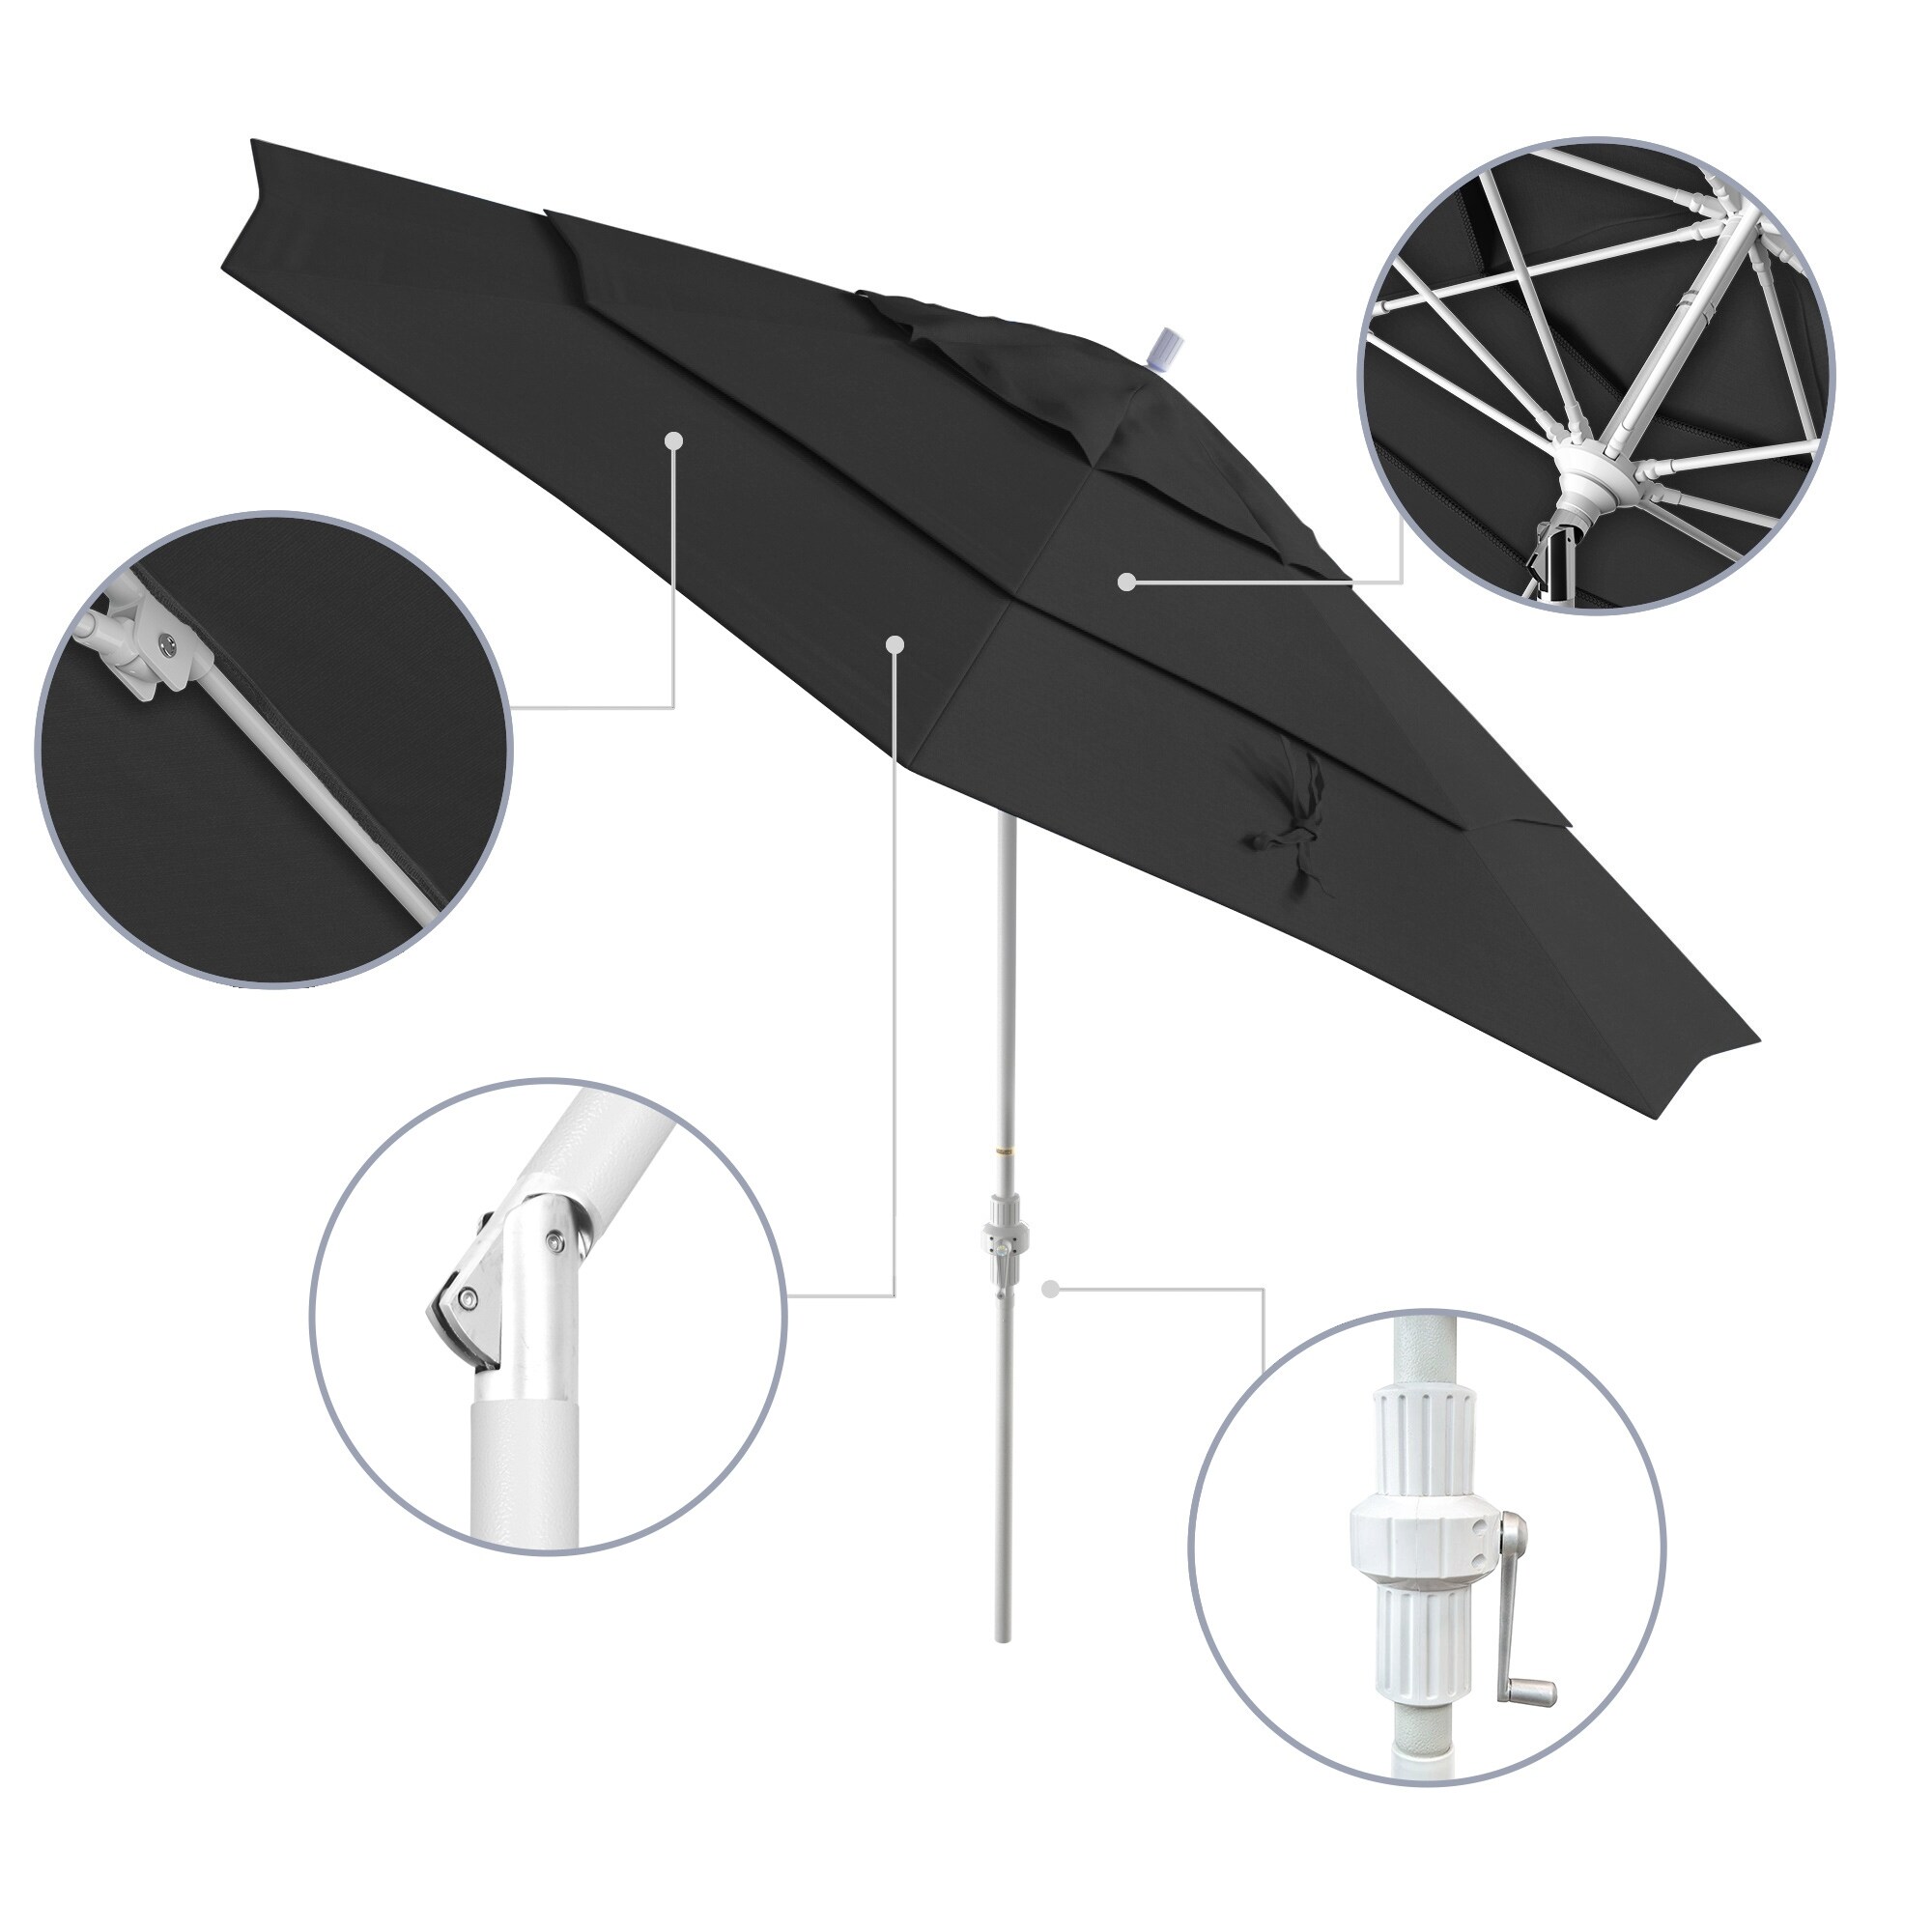 Havenside Home Perry 11ft Crank Lift Aluminum Round Umbrella by , Base Not Included Black - image 2 of 5